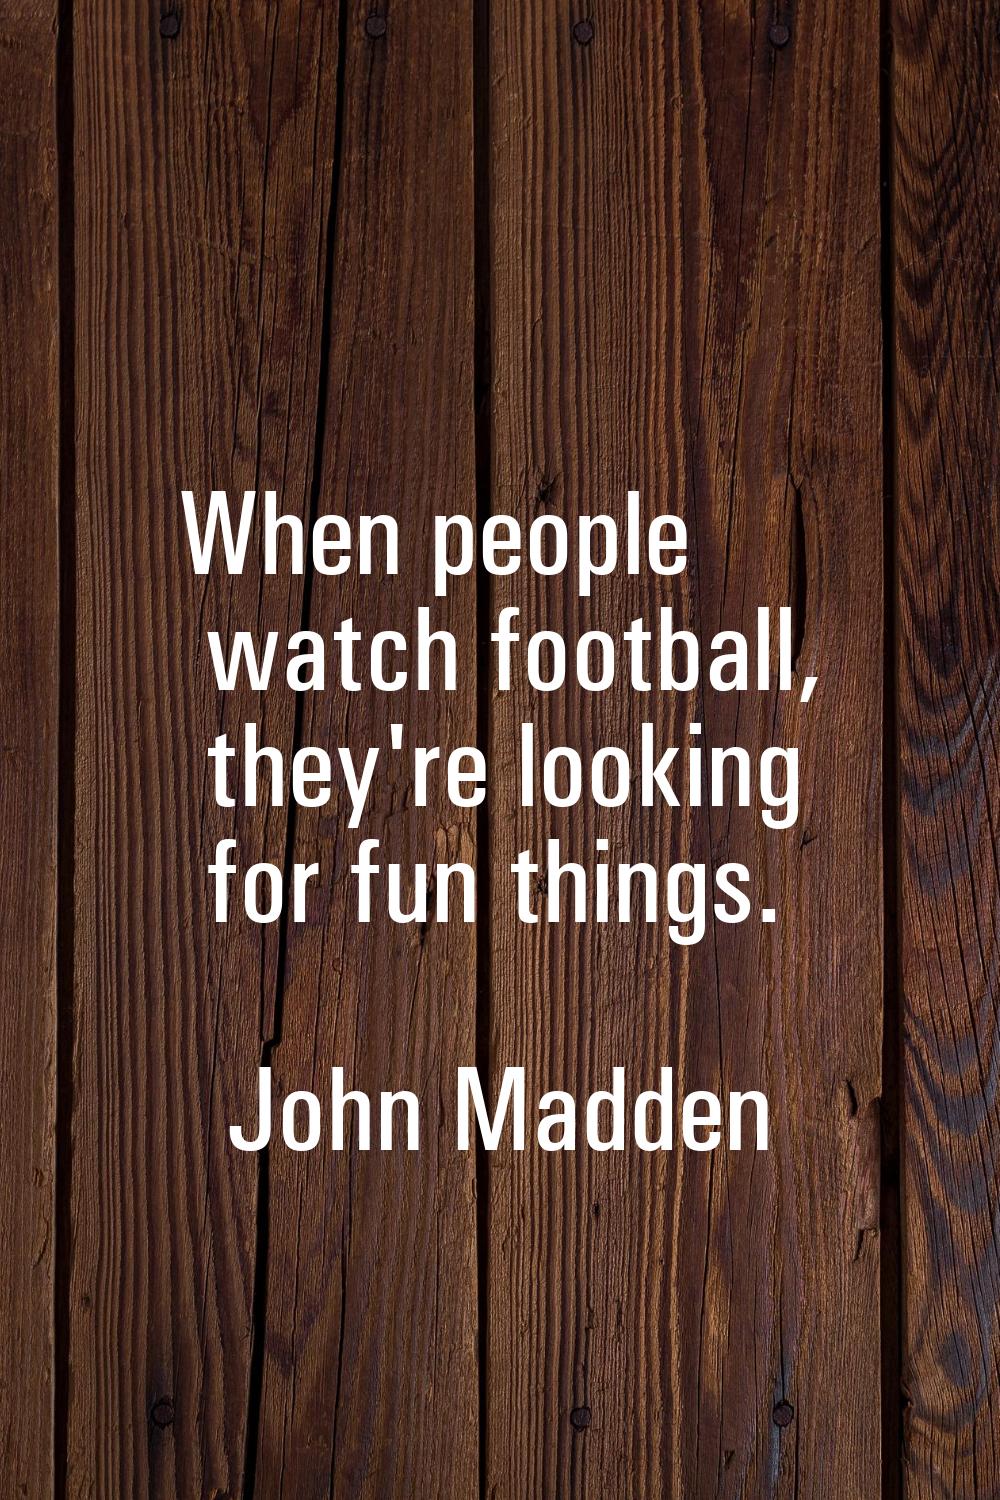 When people watch football, they're looking for fun things.